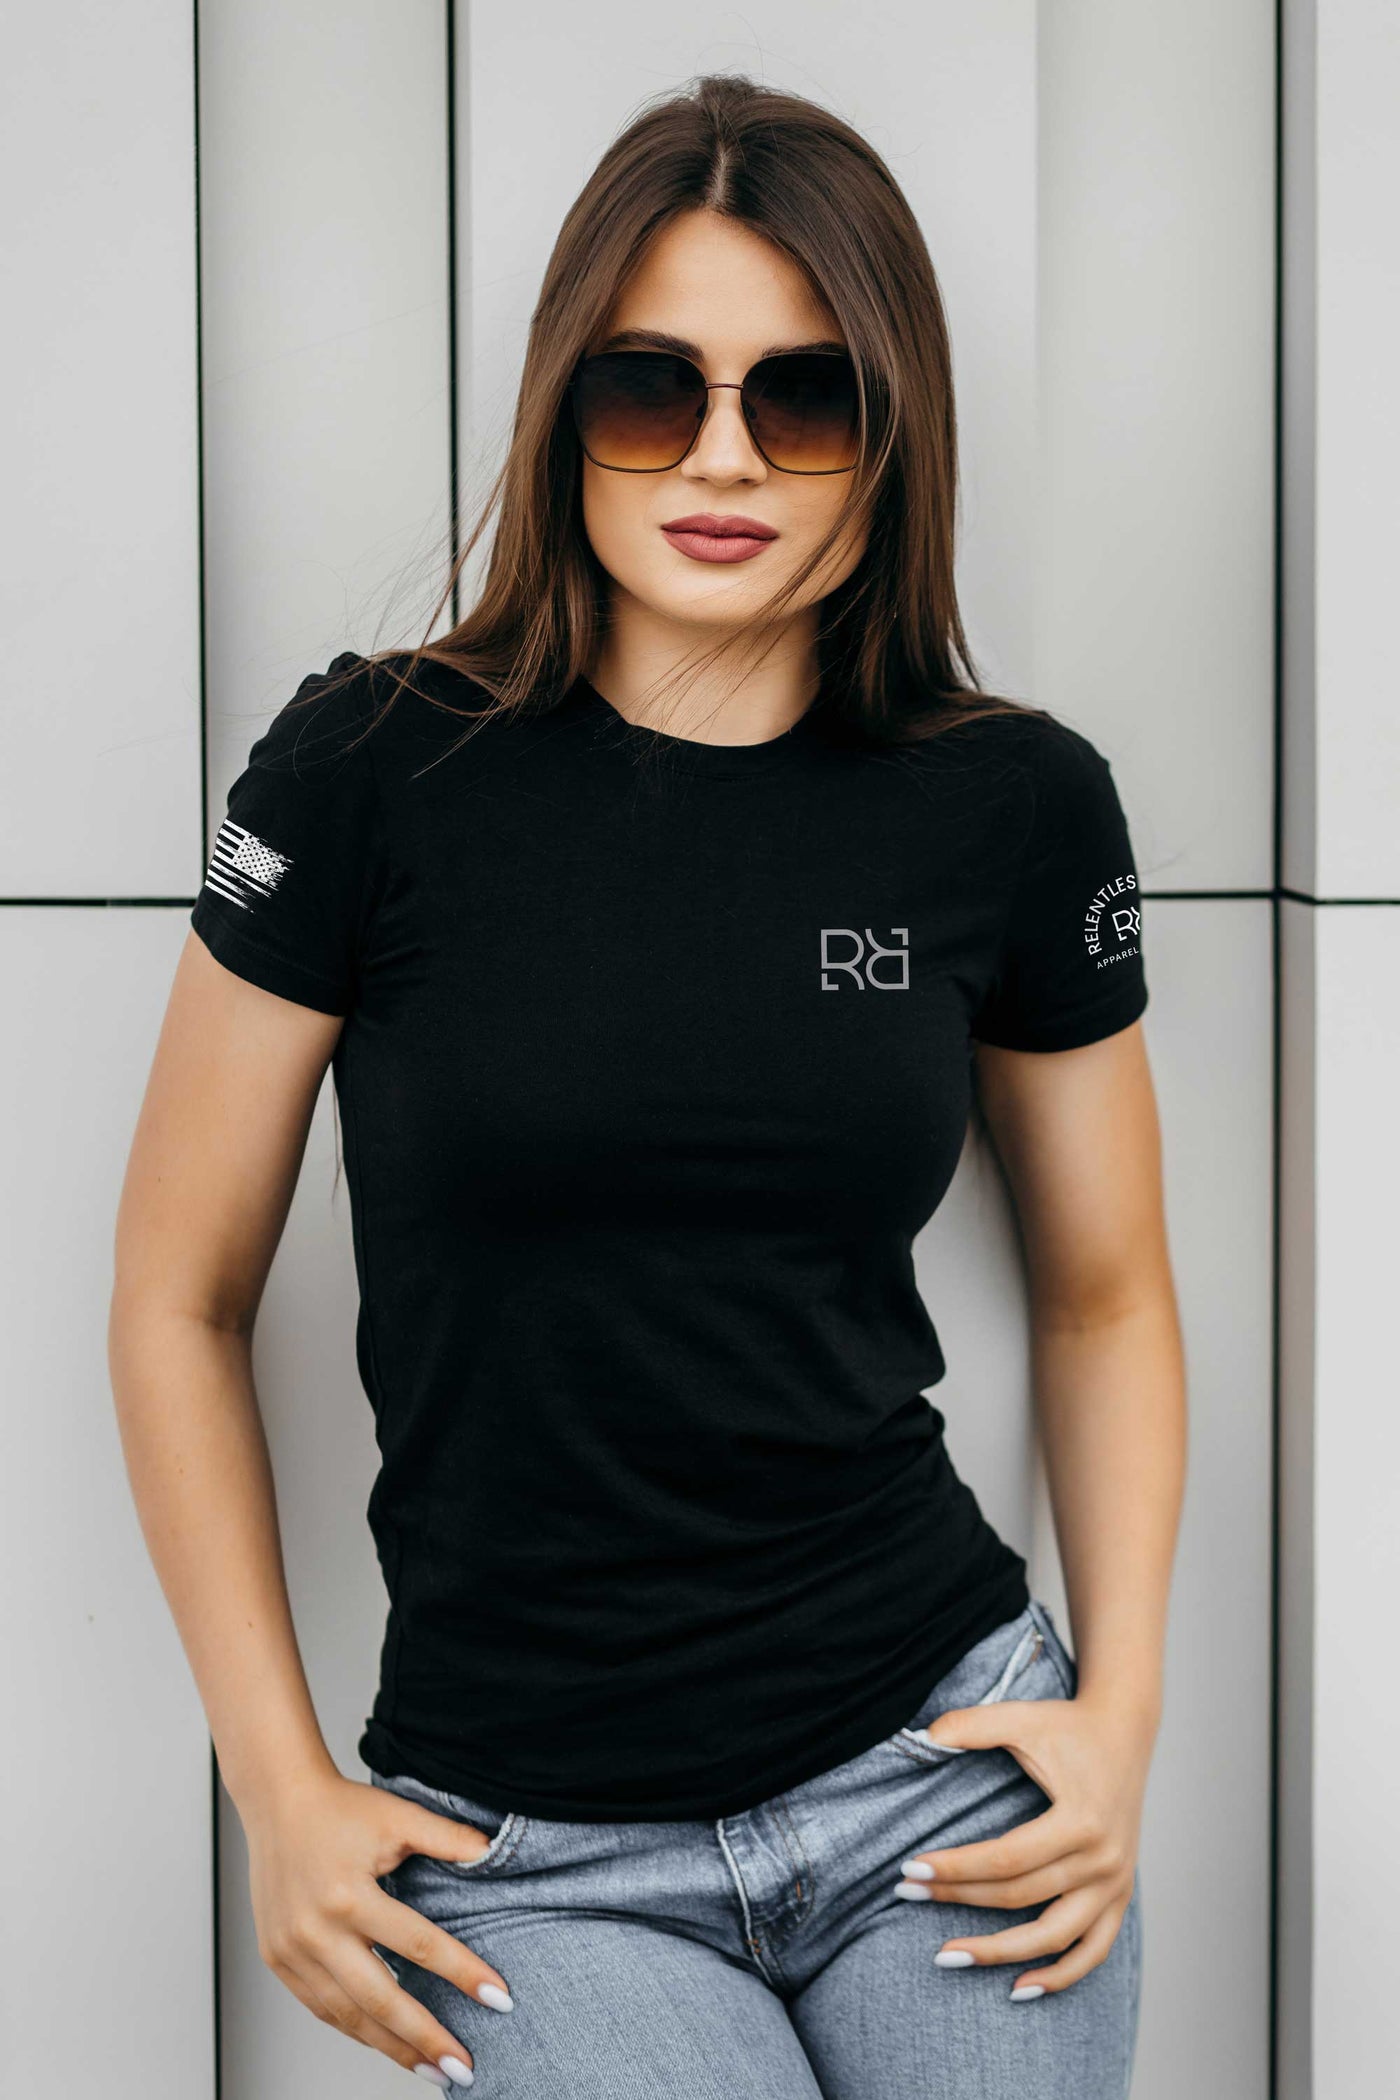 Woman wearing Solid black women's Built Different back design tee